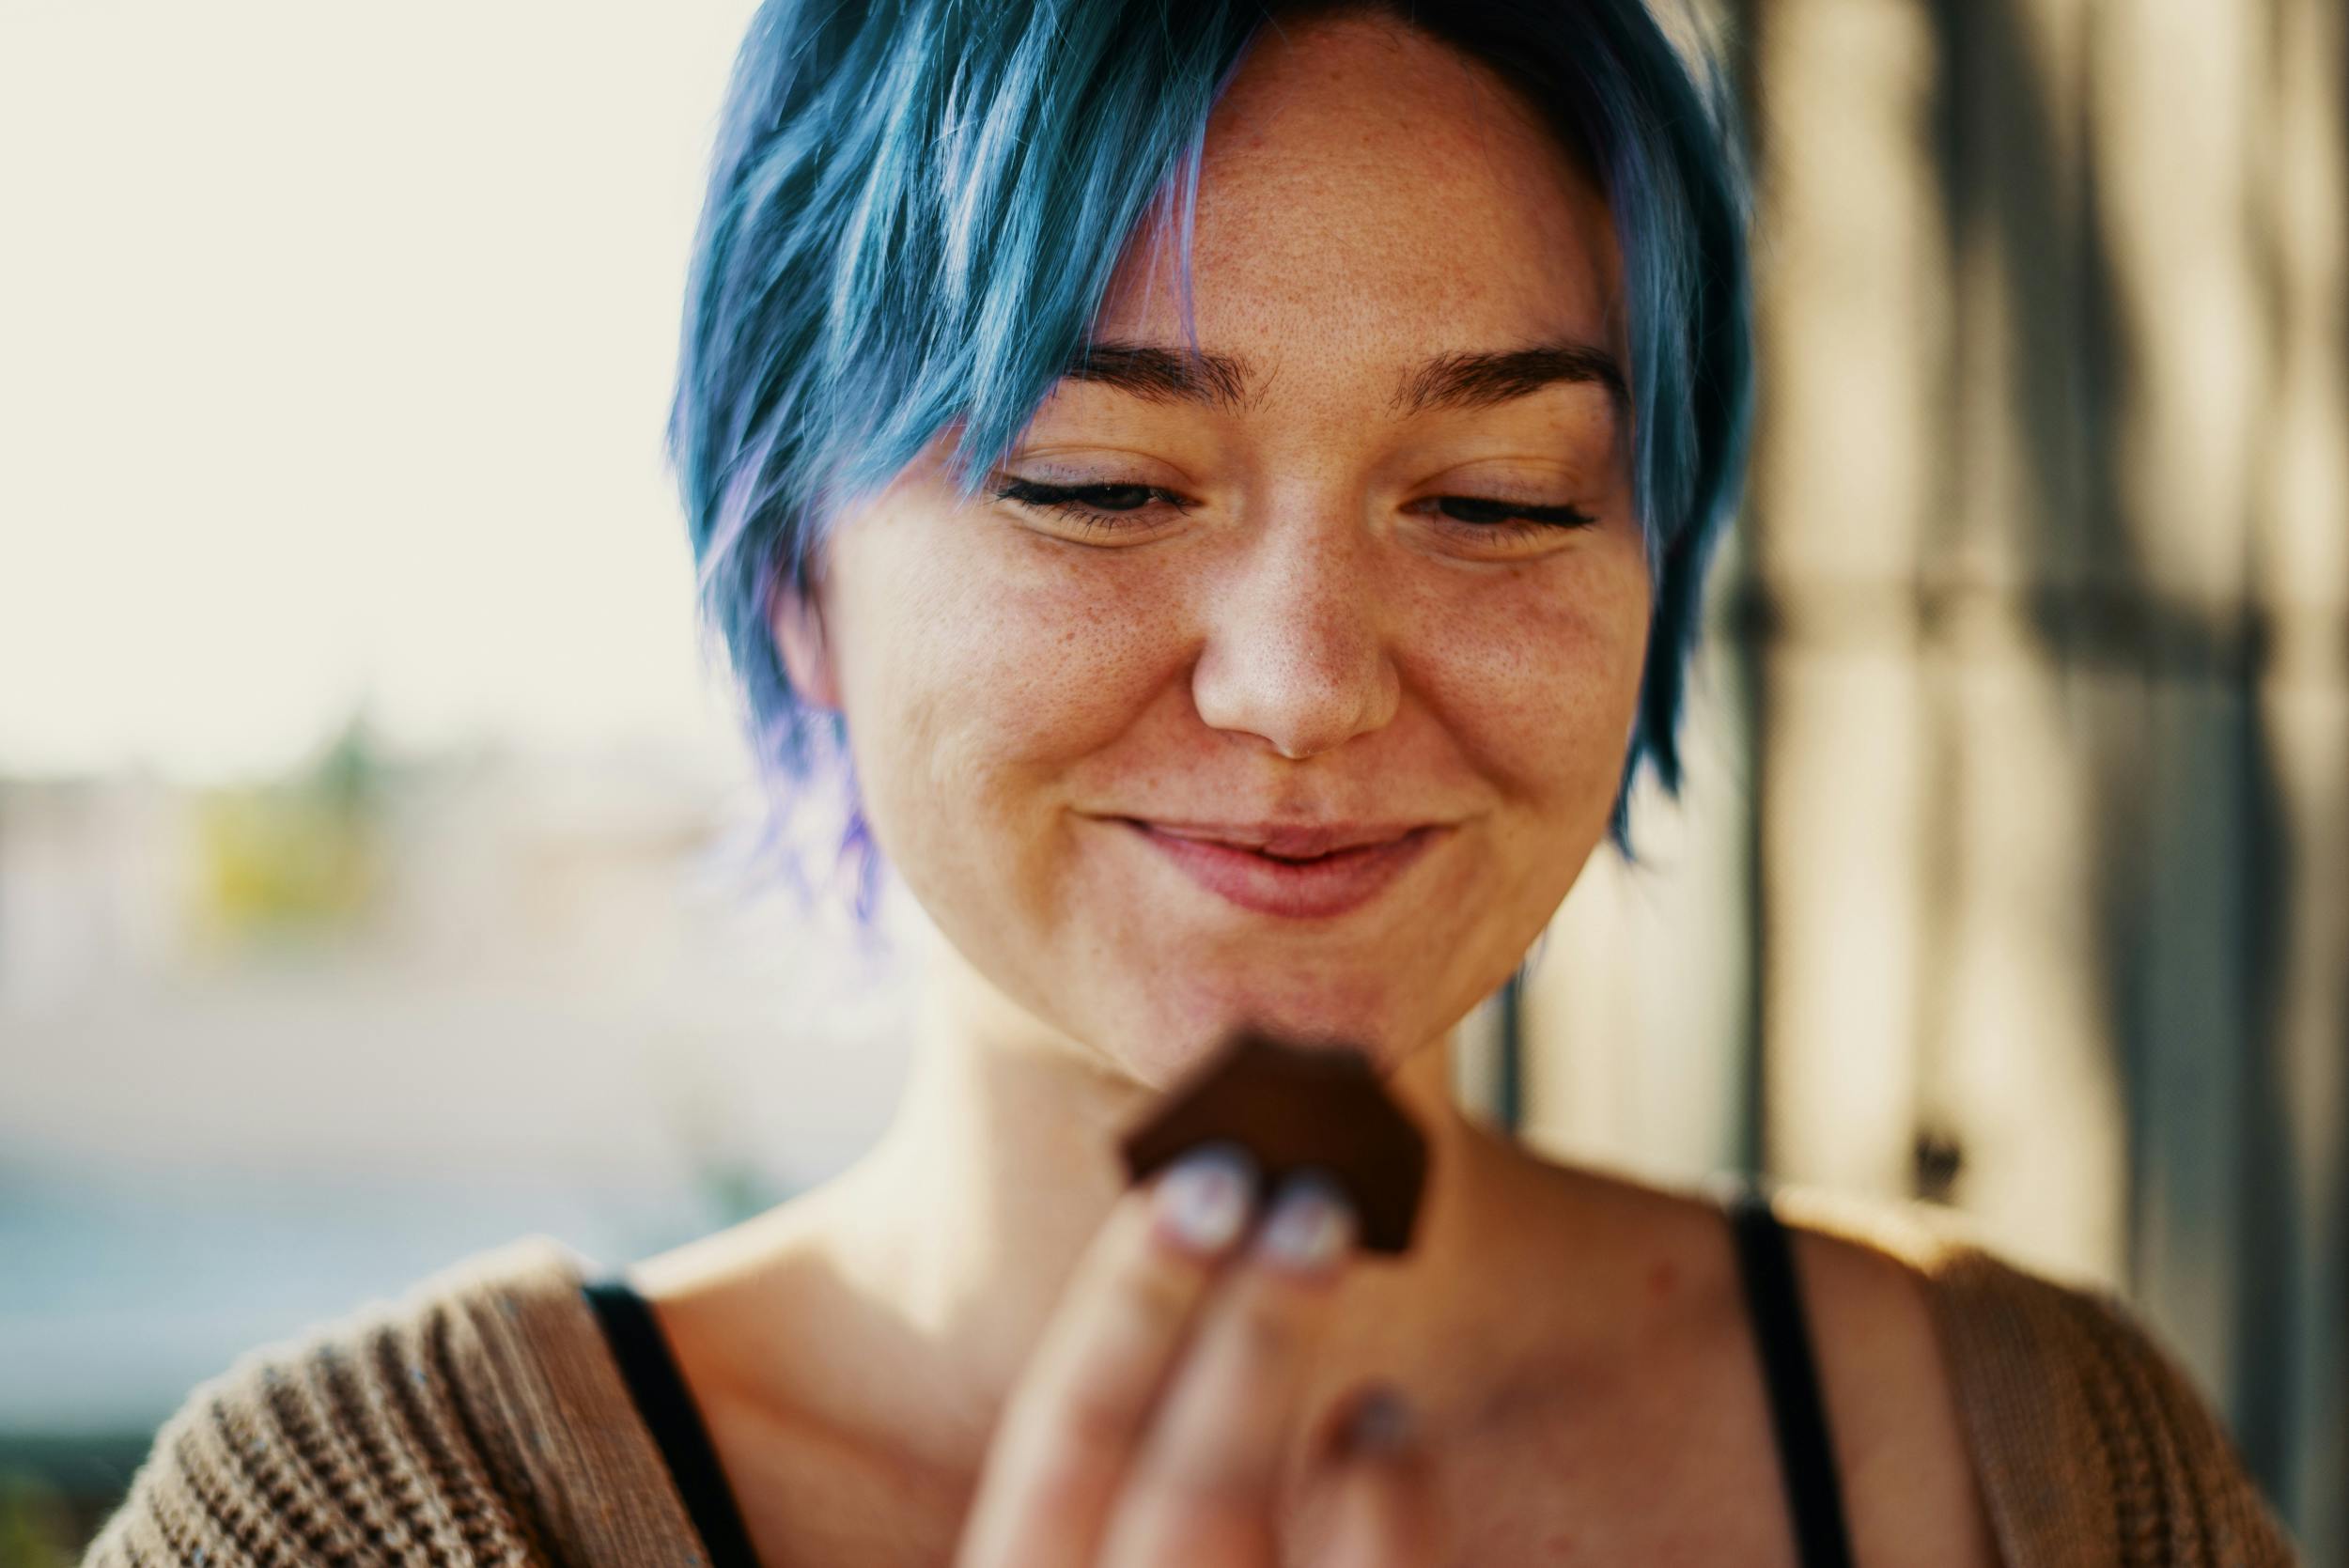 Best CBD Weed Chocolate 20 This Is The Best Weed Chocolate and CBD Chocolate Money Can Buy